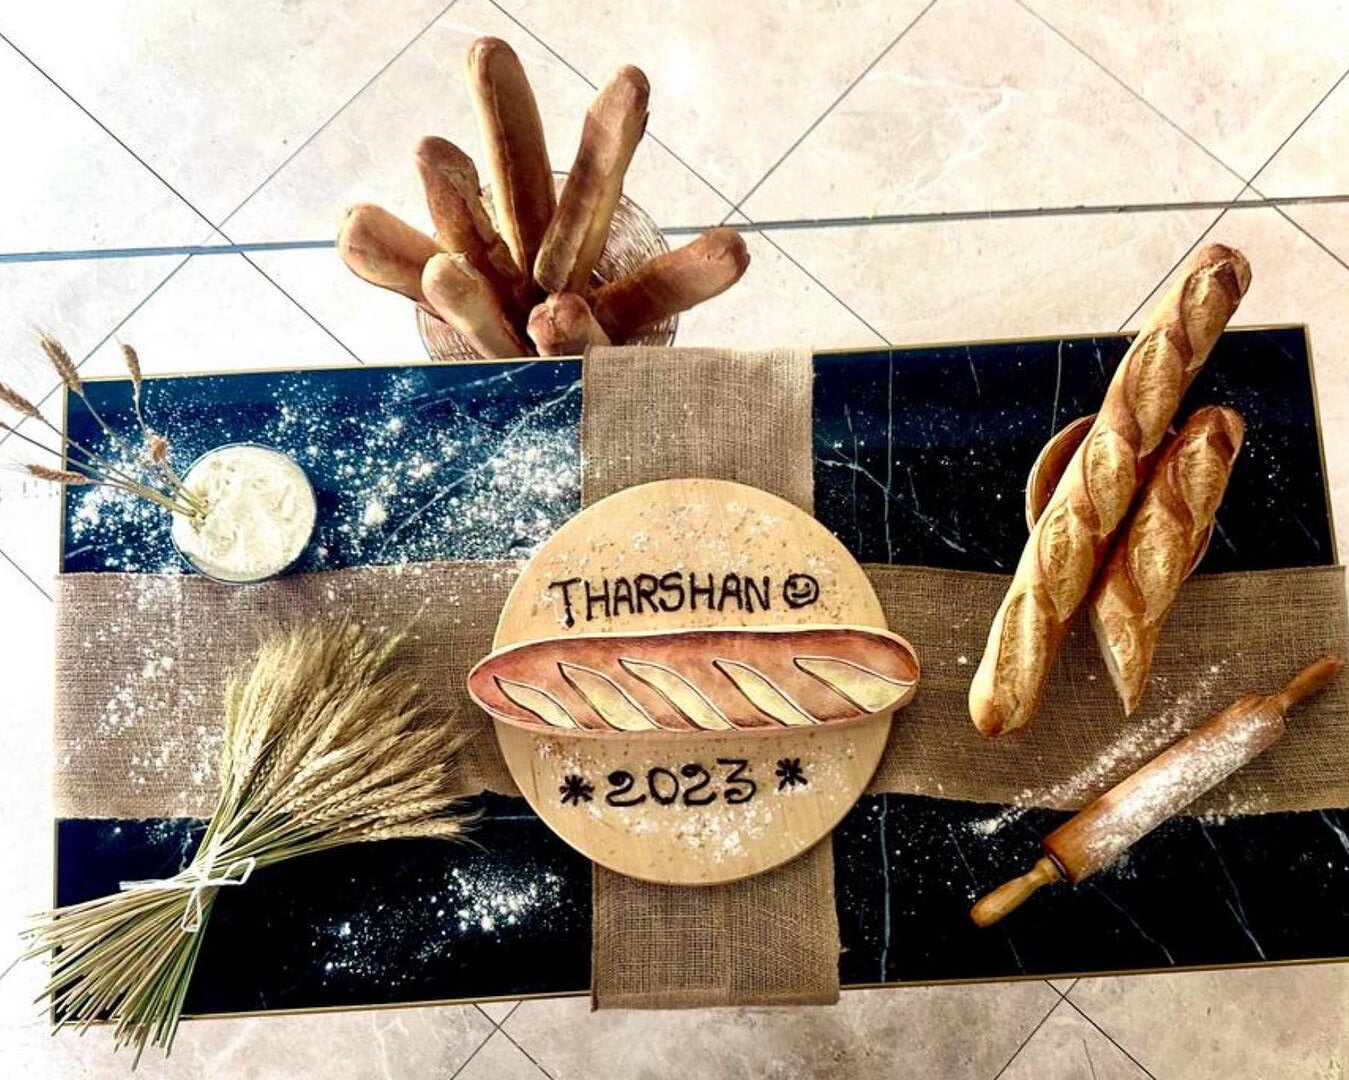 Paris Calls Tharshan Selvarajah The Best Baguette Baker In The City! Here's Why: His official recognition plaque. Photo Credit: www.instagram.com